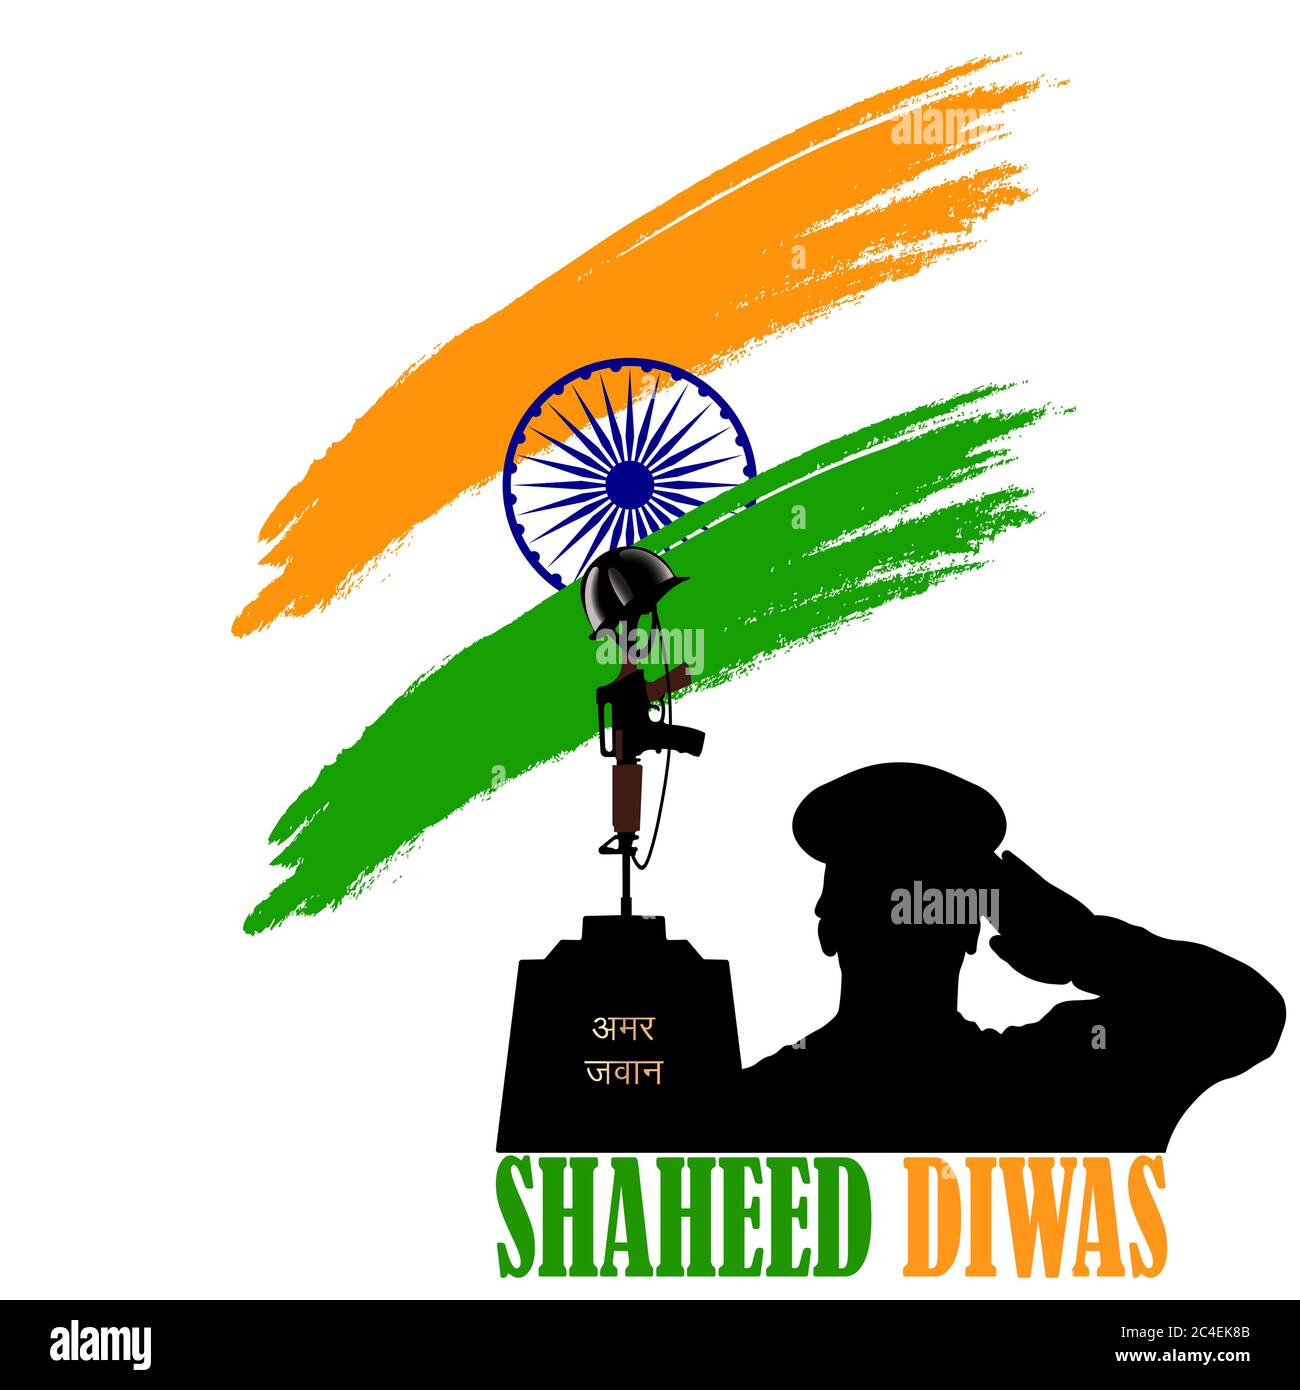 Vector Illustration of Shaheed Diwas. Commemoration day. Martyr's Day. Poster for salute indian army, amar jyoti, amar jawan. Stock Vector